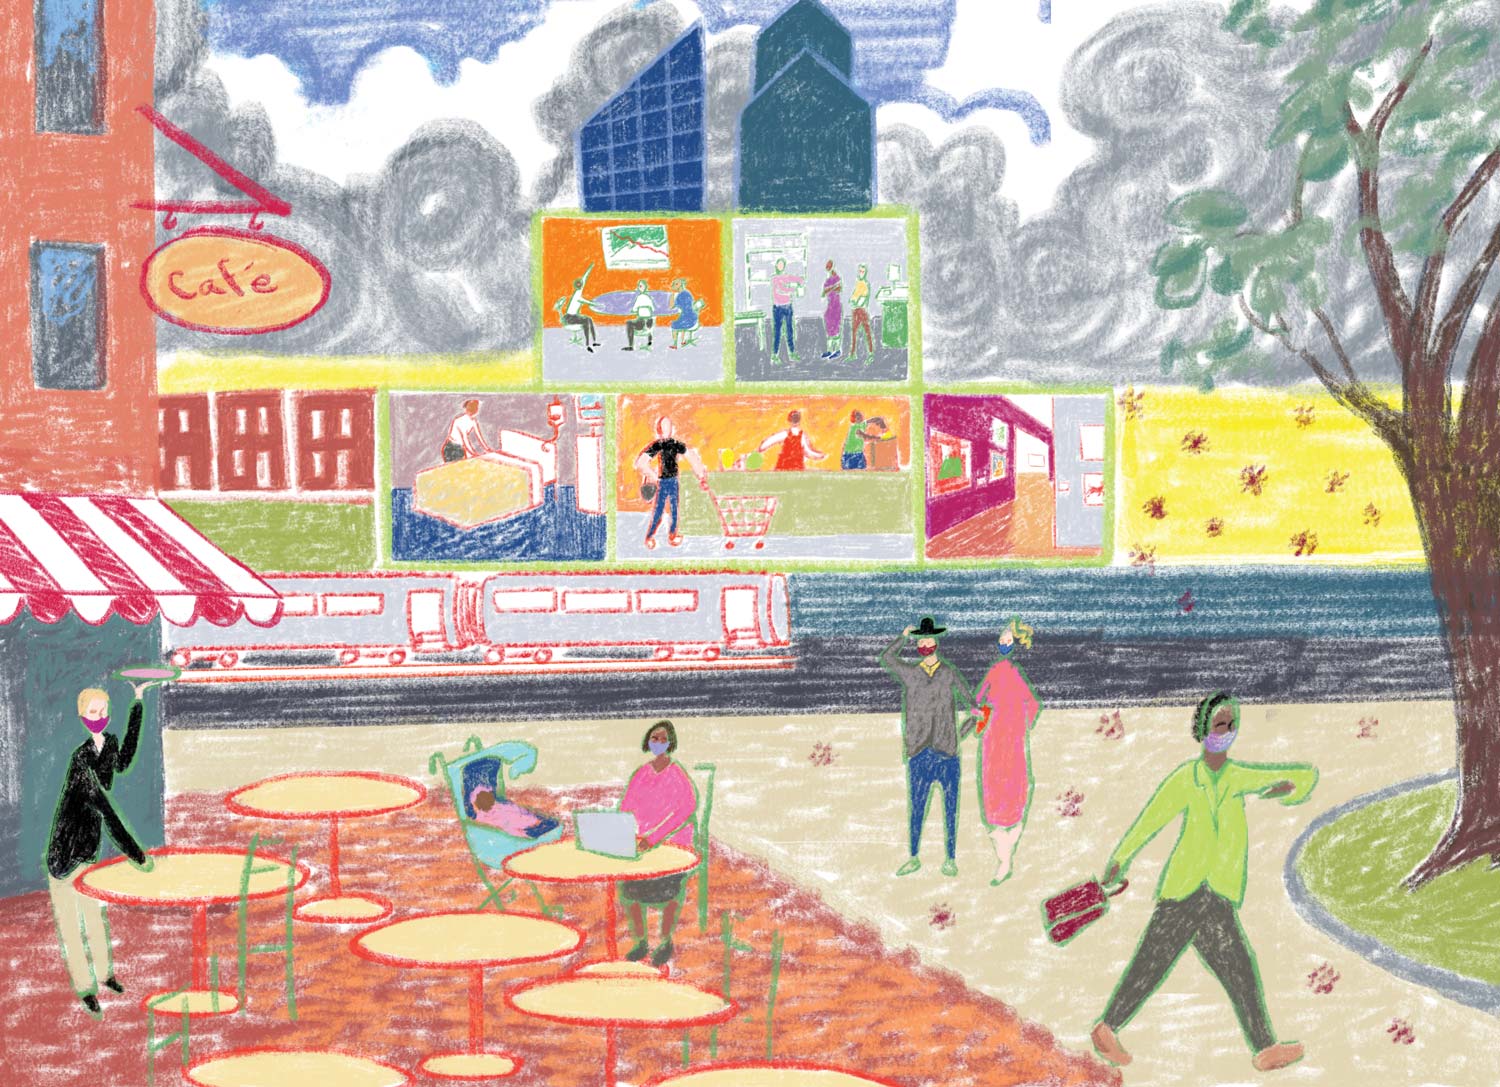 Pastel illustration of people out in society. On the left is a cafe with a woman at a table working on a laptop with a baby next to her in a stroller. A server is carrying a tray. To the right is a person wearing a green coat and looking at their watch. A couple stand together with arms linked. In the background are a train, a grocery store, a bed being made, and other images, as swirling clouds fill the sky.